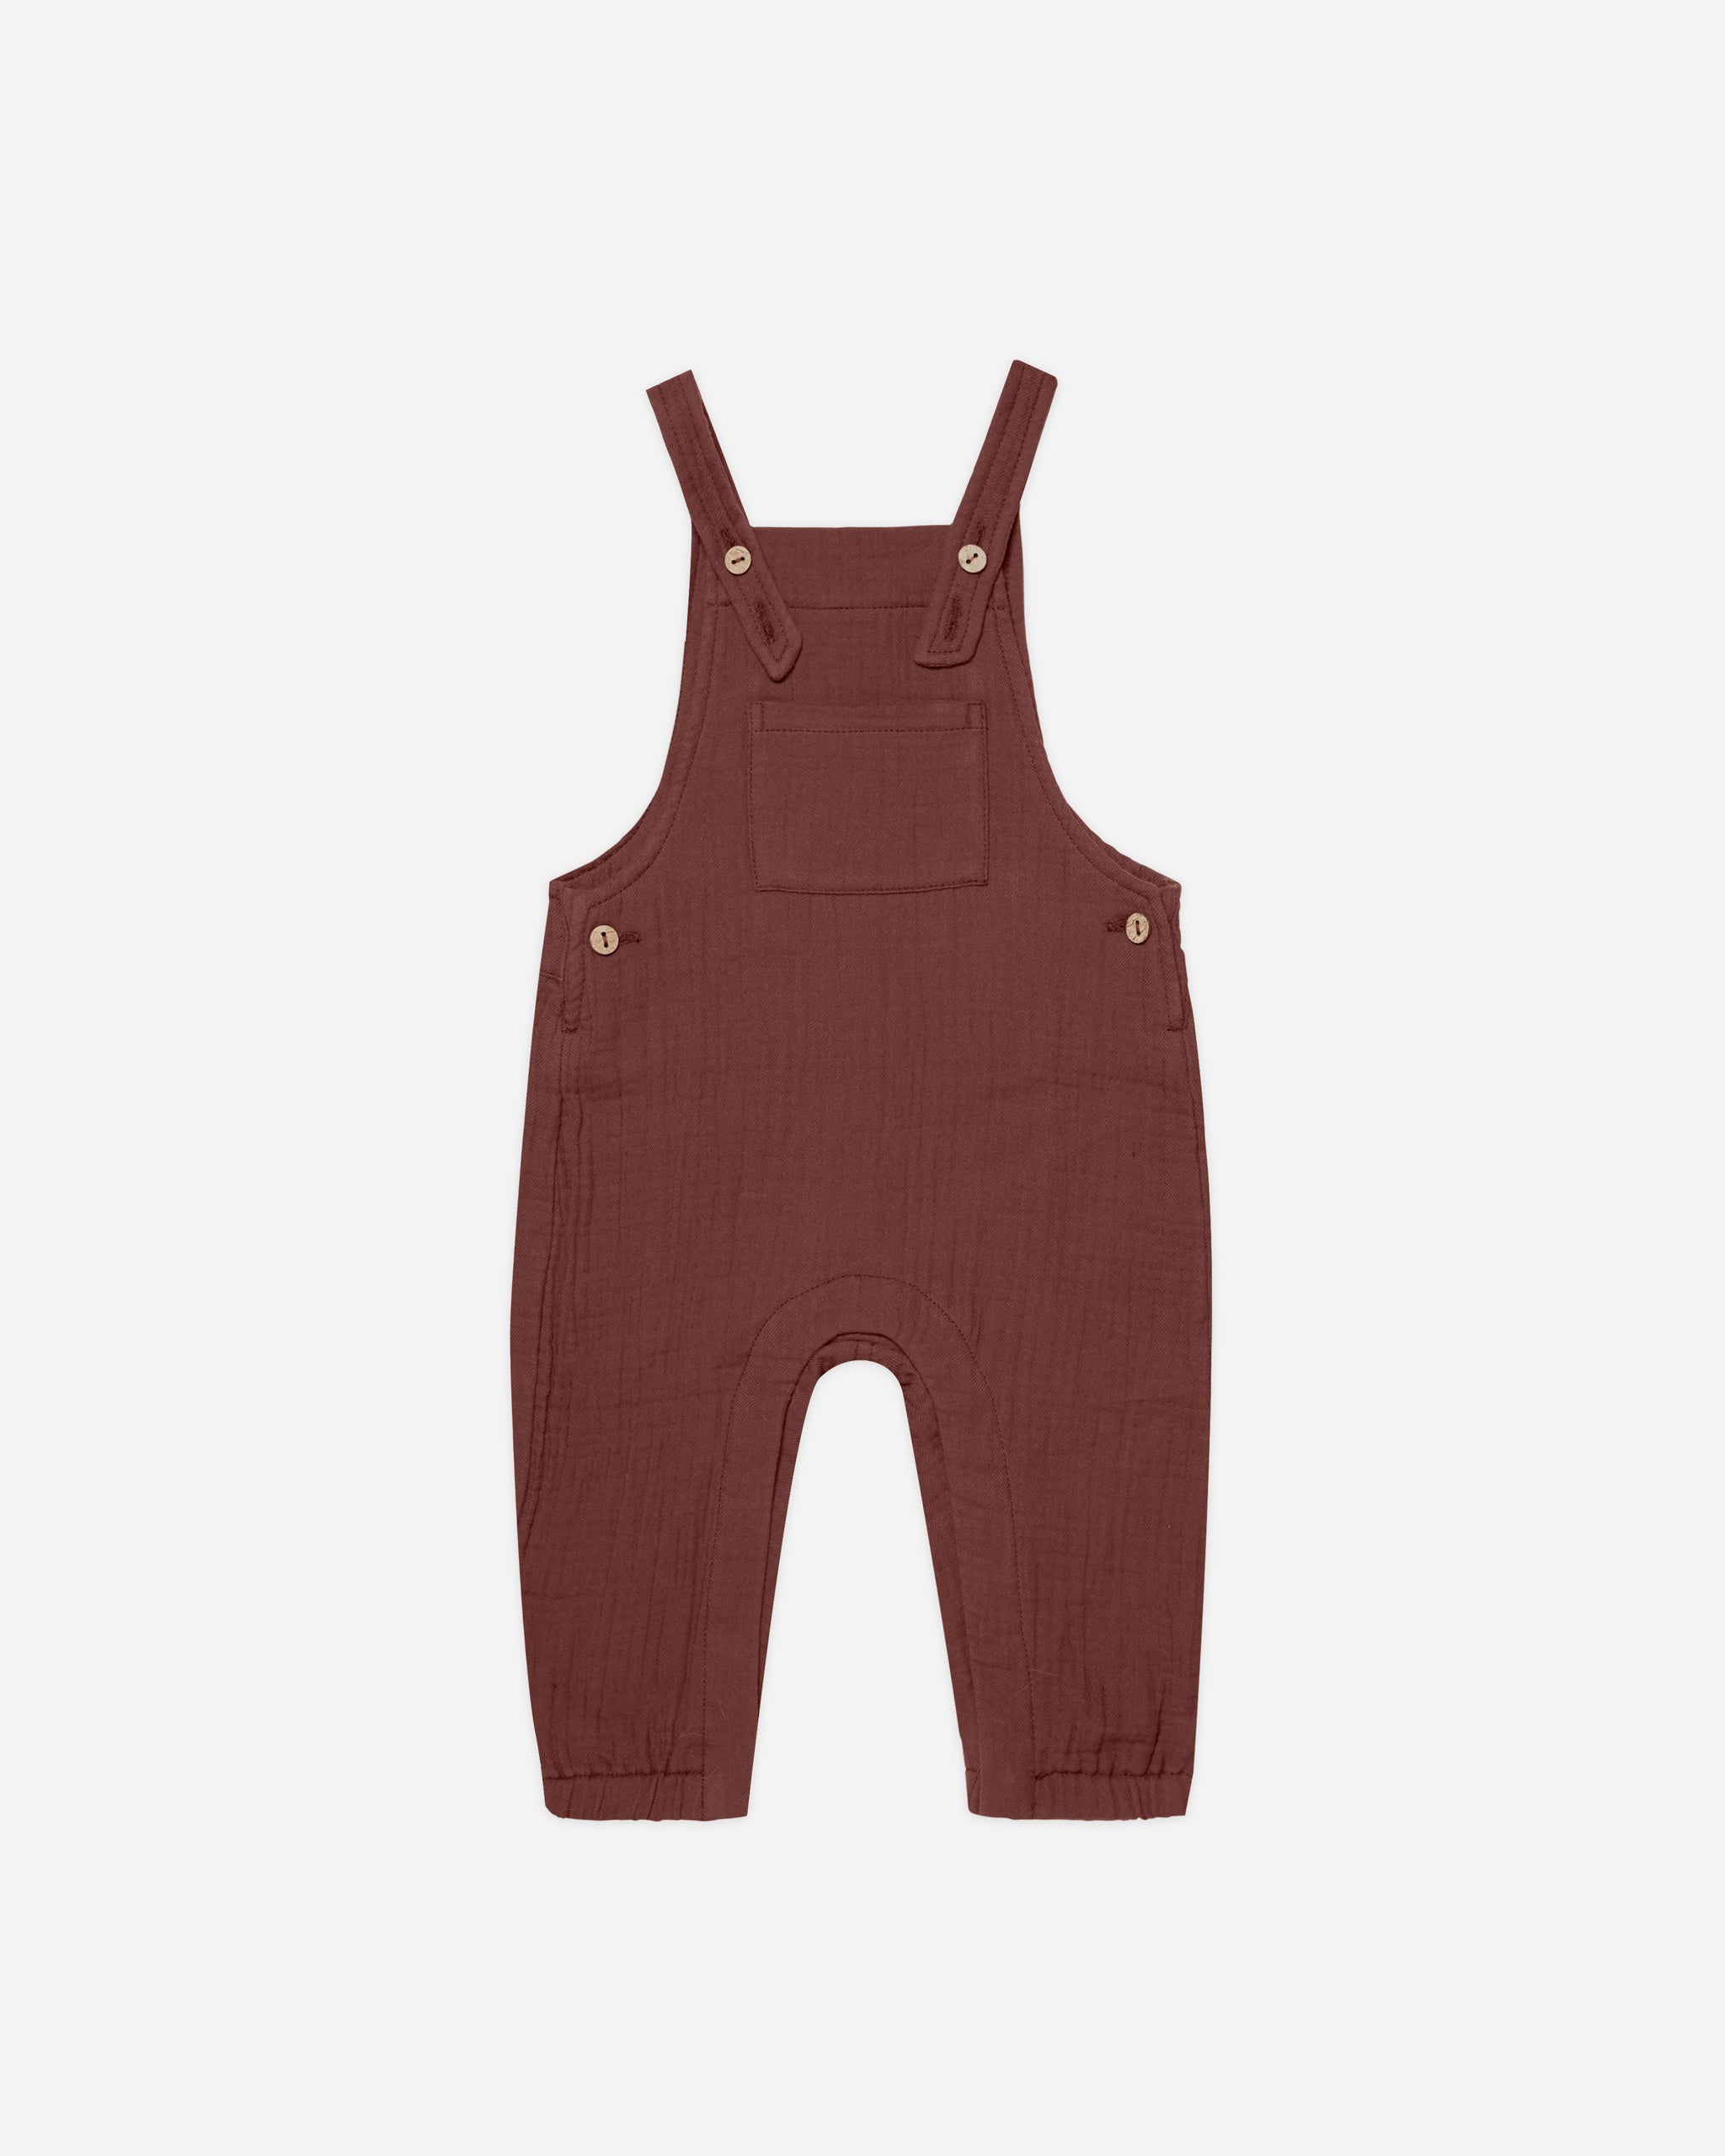 Baby Overall || Plum - Rylee + Cru | Kids Clothes | Trendy Baby Clothes | Modern Infant Outfits |